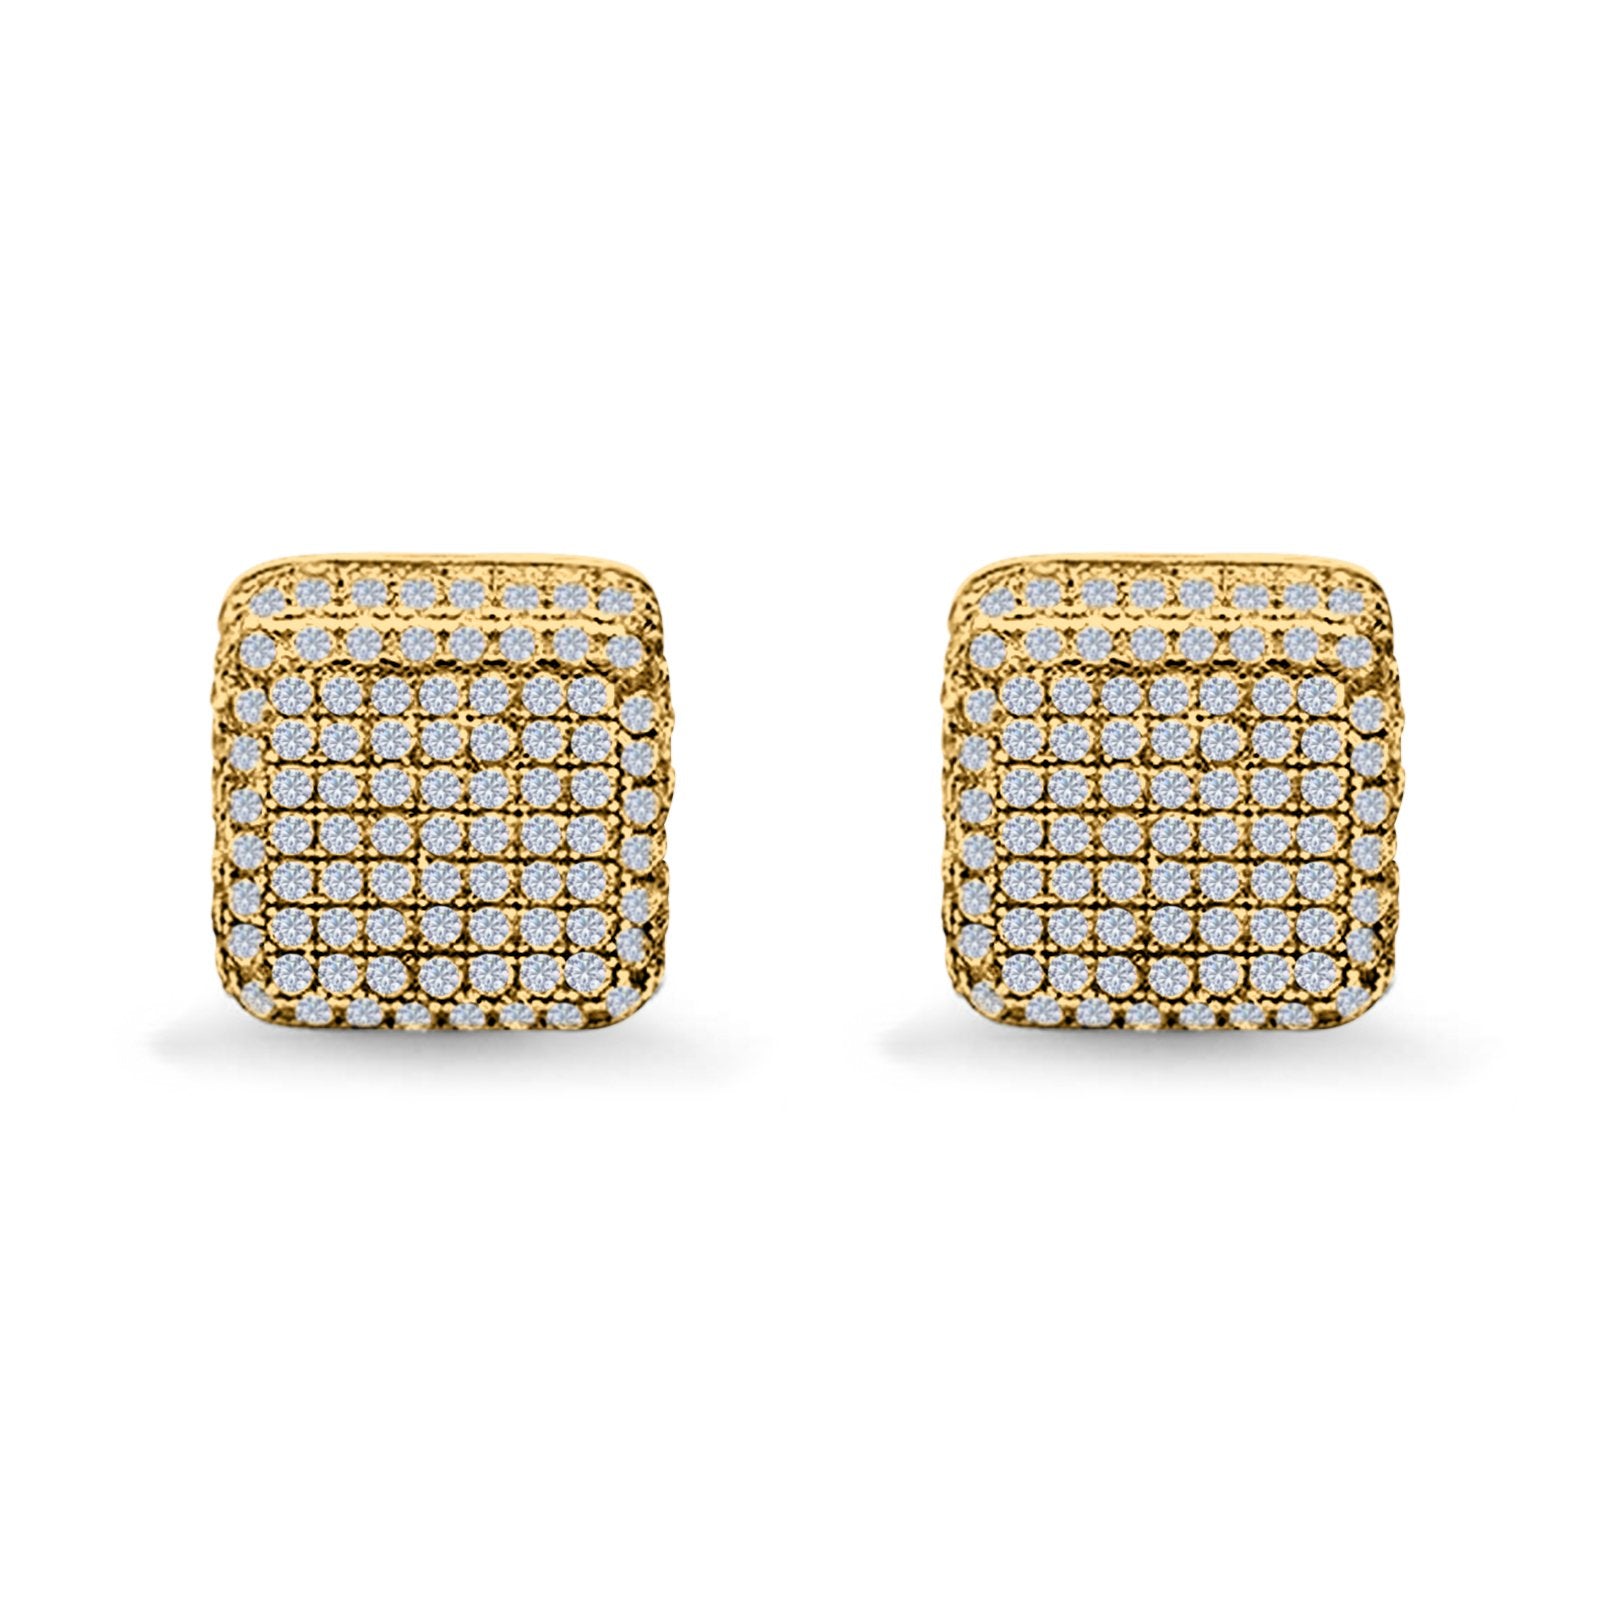 Casting Square Stud Earrings Screw Back .925 Sterling Silver Sizes 2-8mm  Available in 3 Colors!